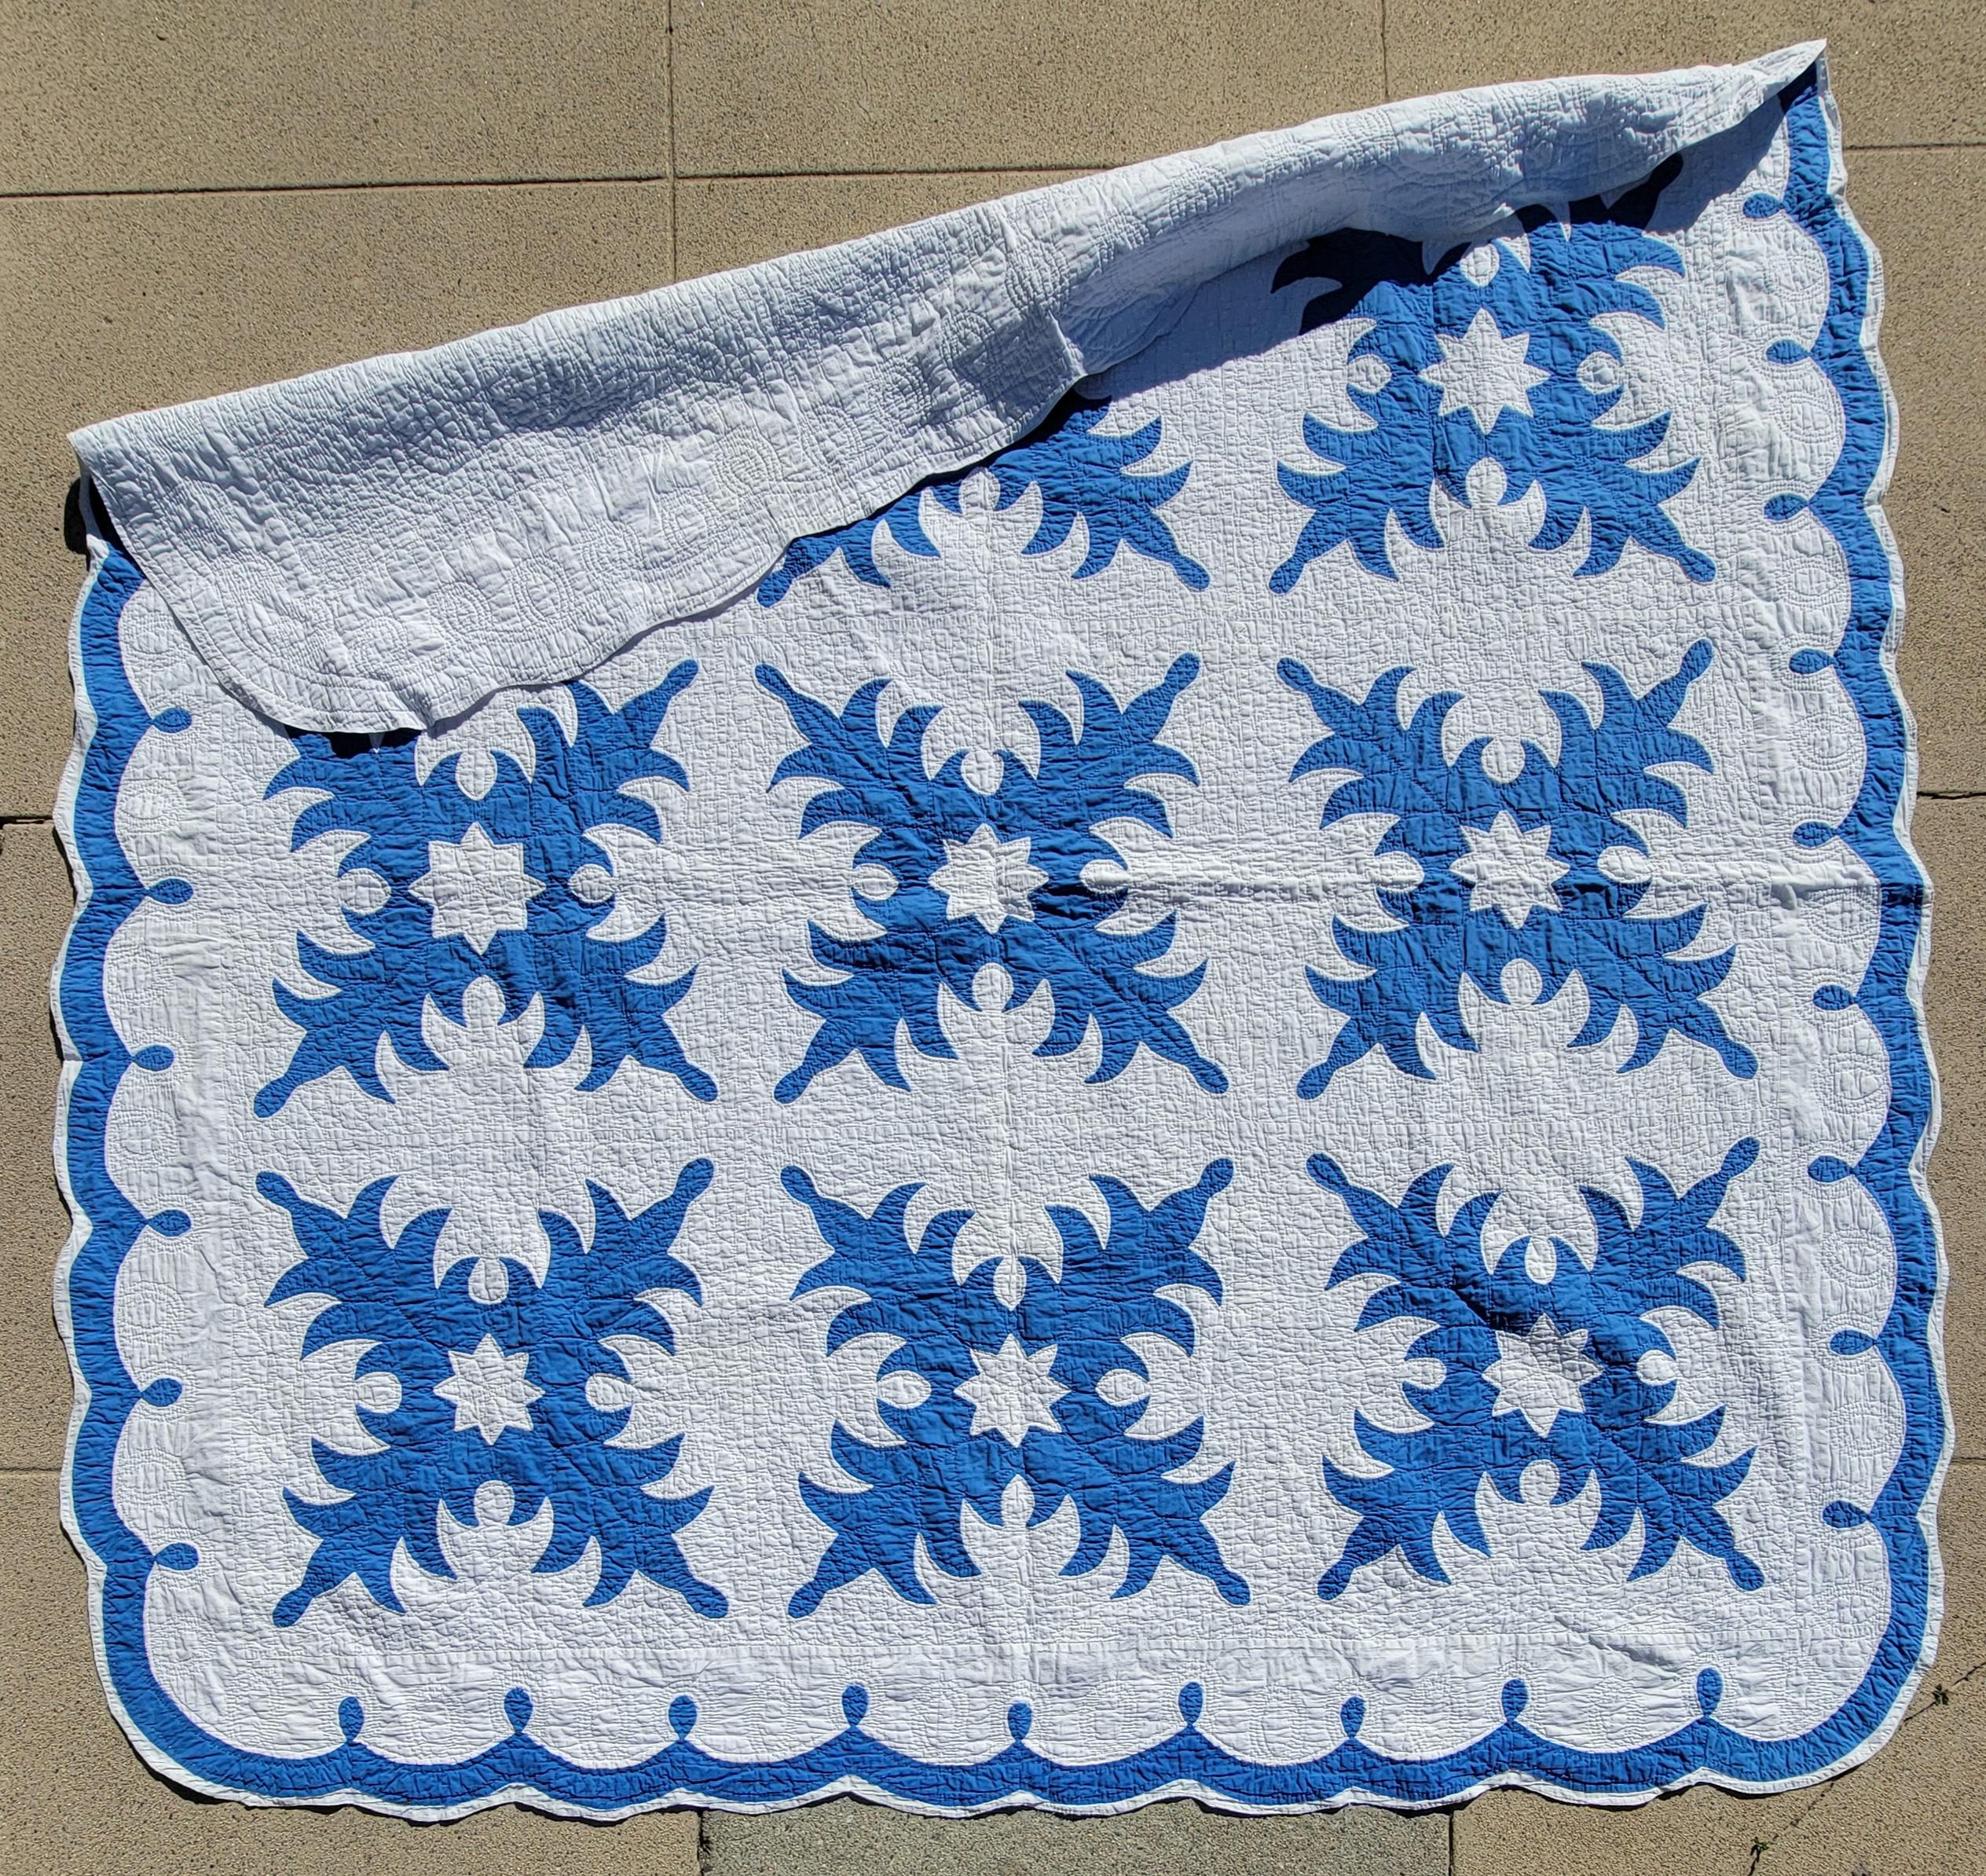 This fine quilted and nicely pieced snow flake applique blue & white quilt with a great scalloped border.Hand pieced and sewn edging. Robin egg blue & white quilt from Ohio.